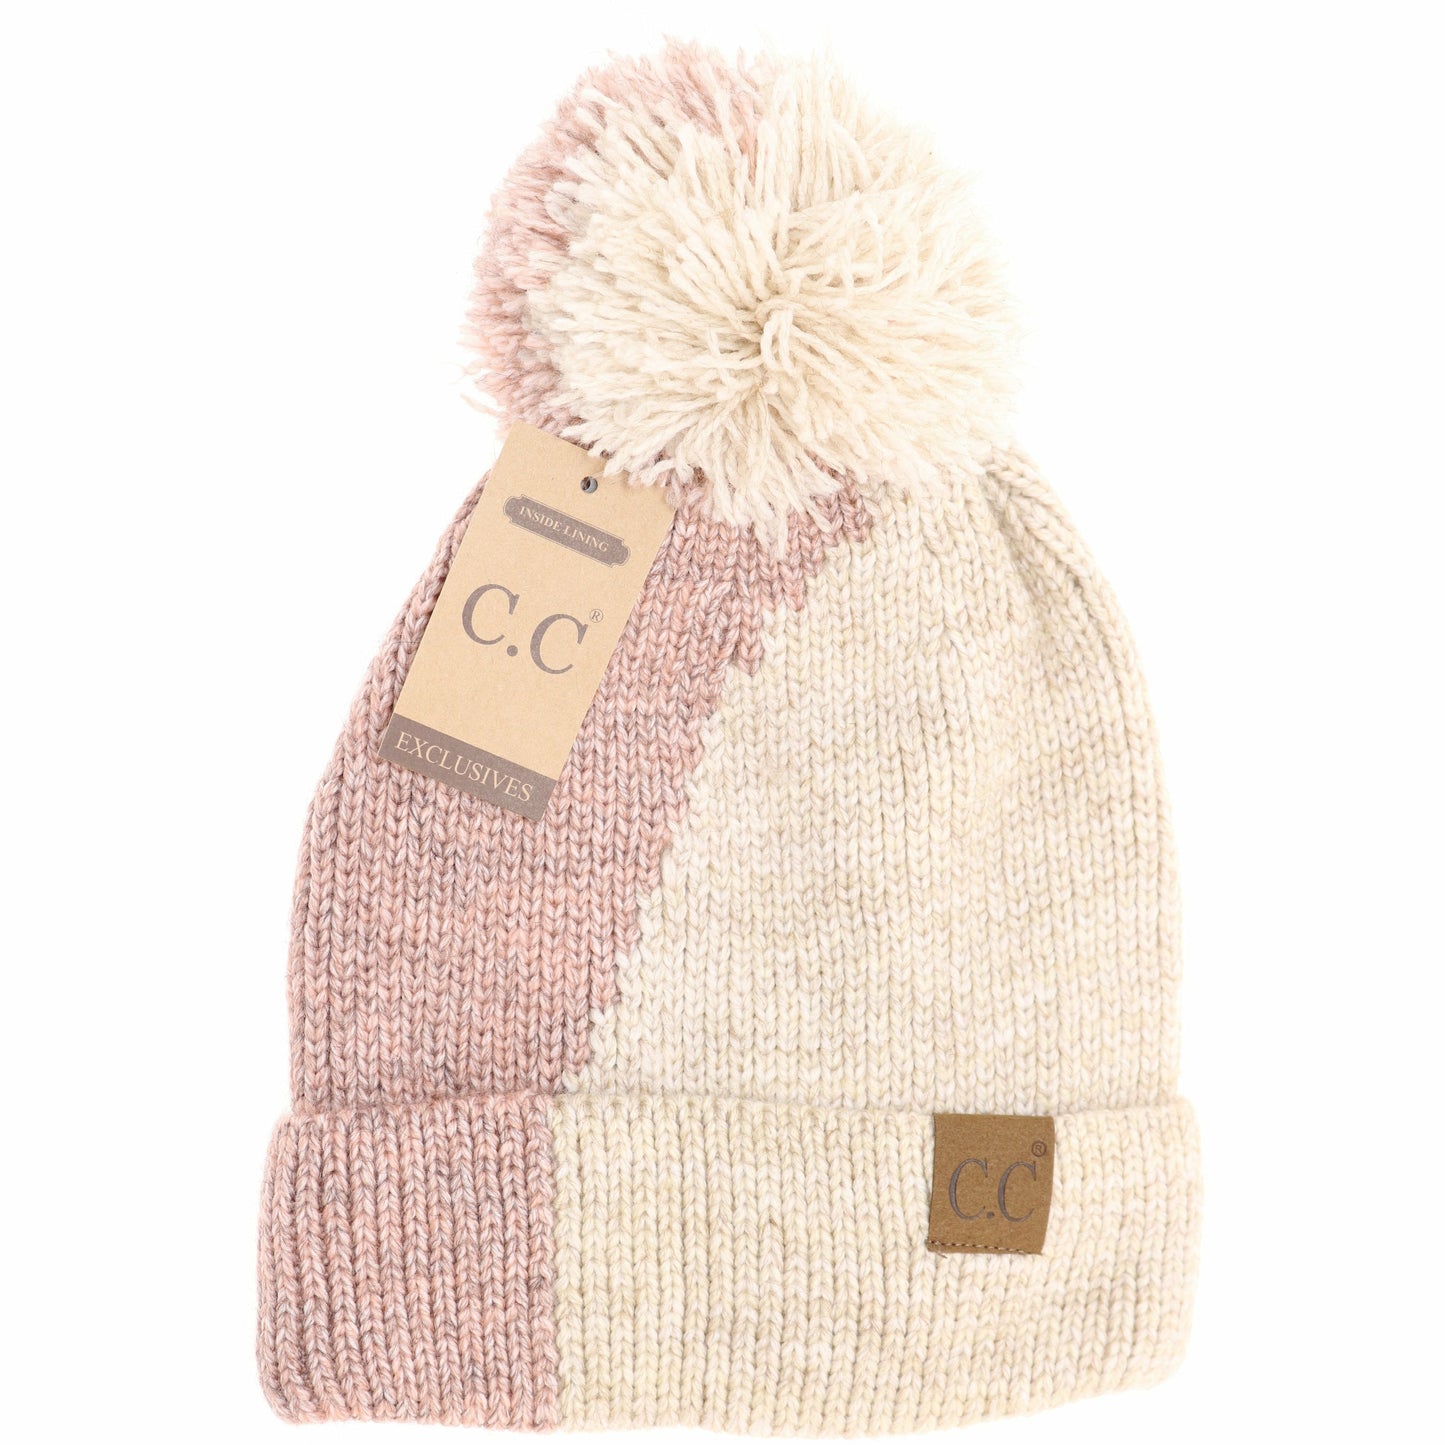 CC Adult Two Tone Knit Beanie *Multiple Colors*